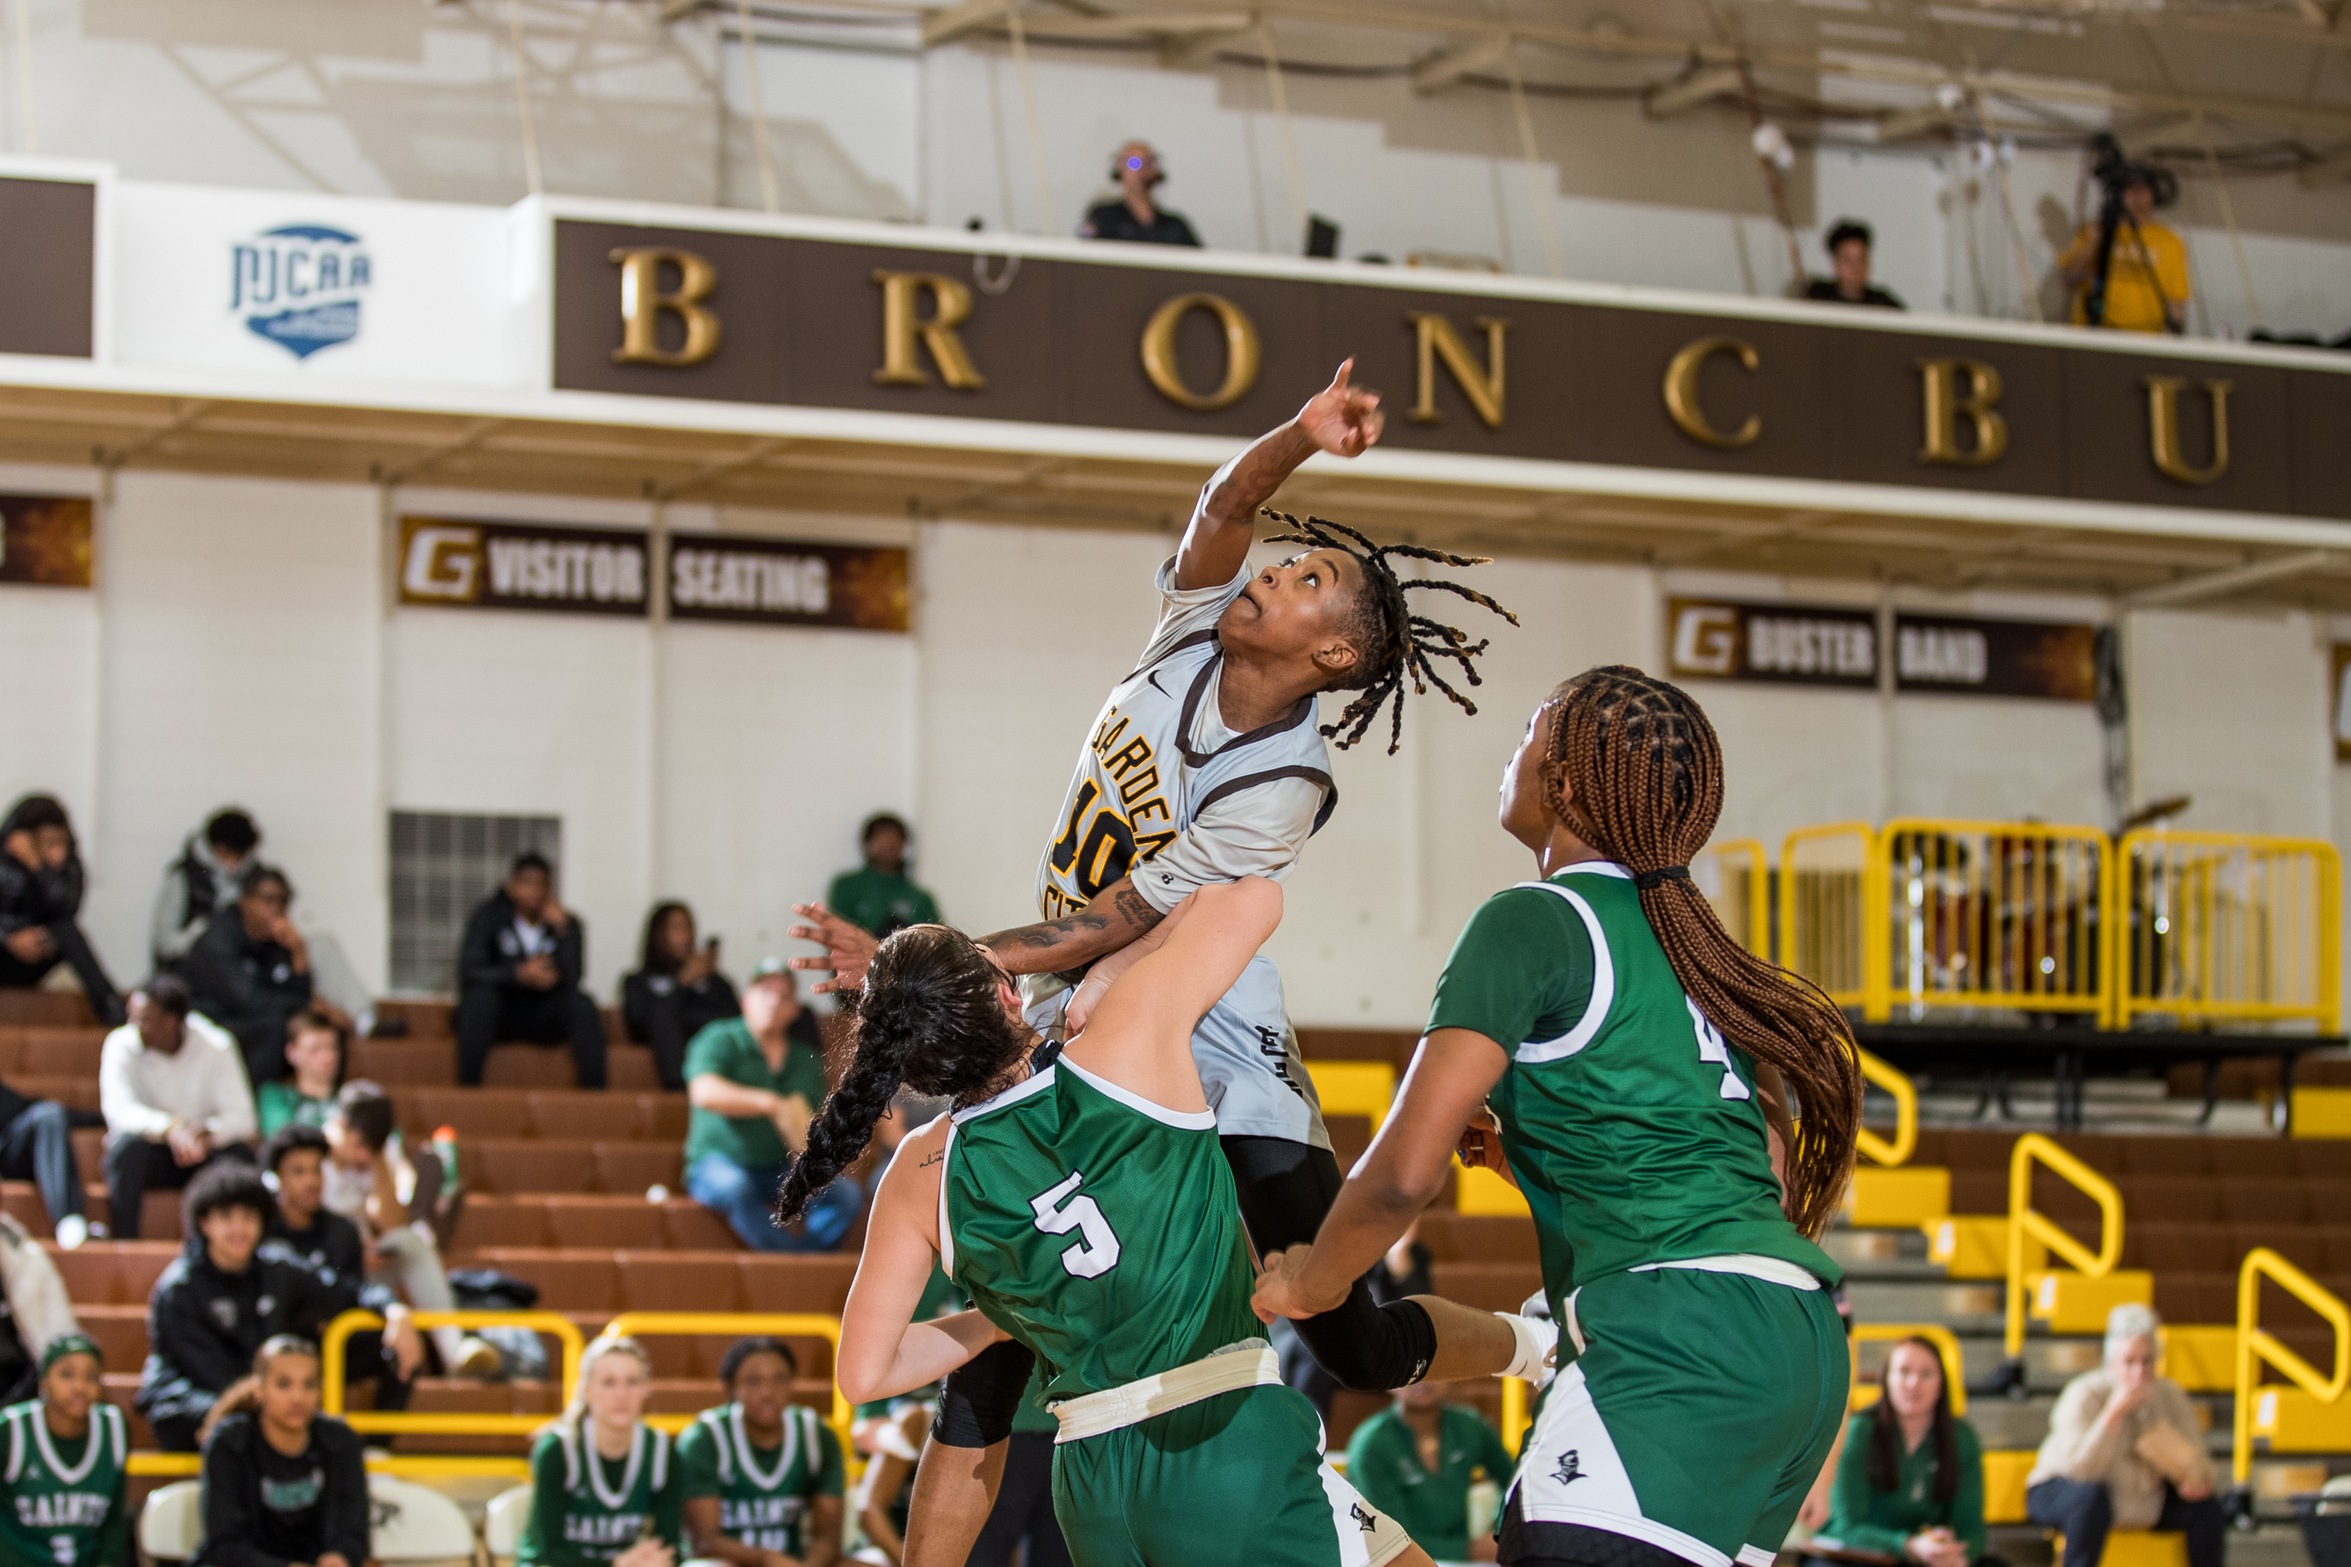 Broncbusters drop first game of second semester